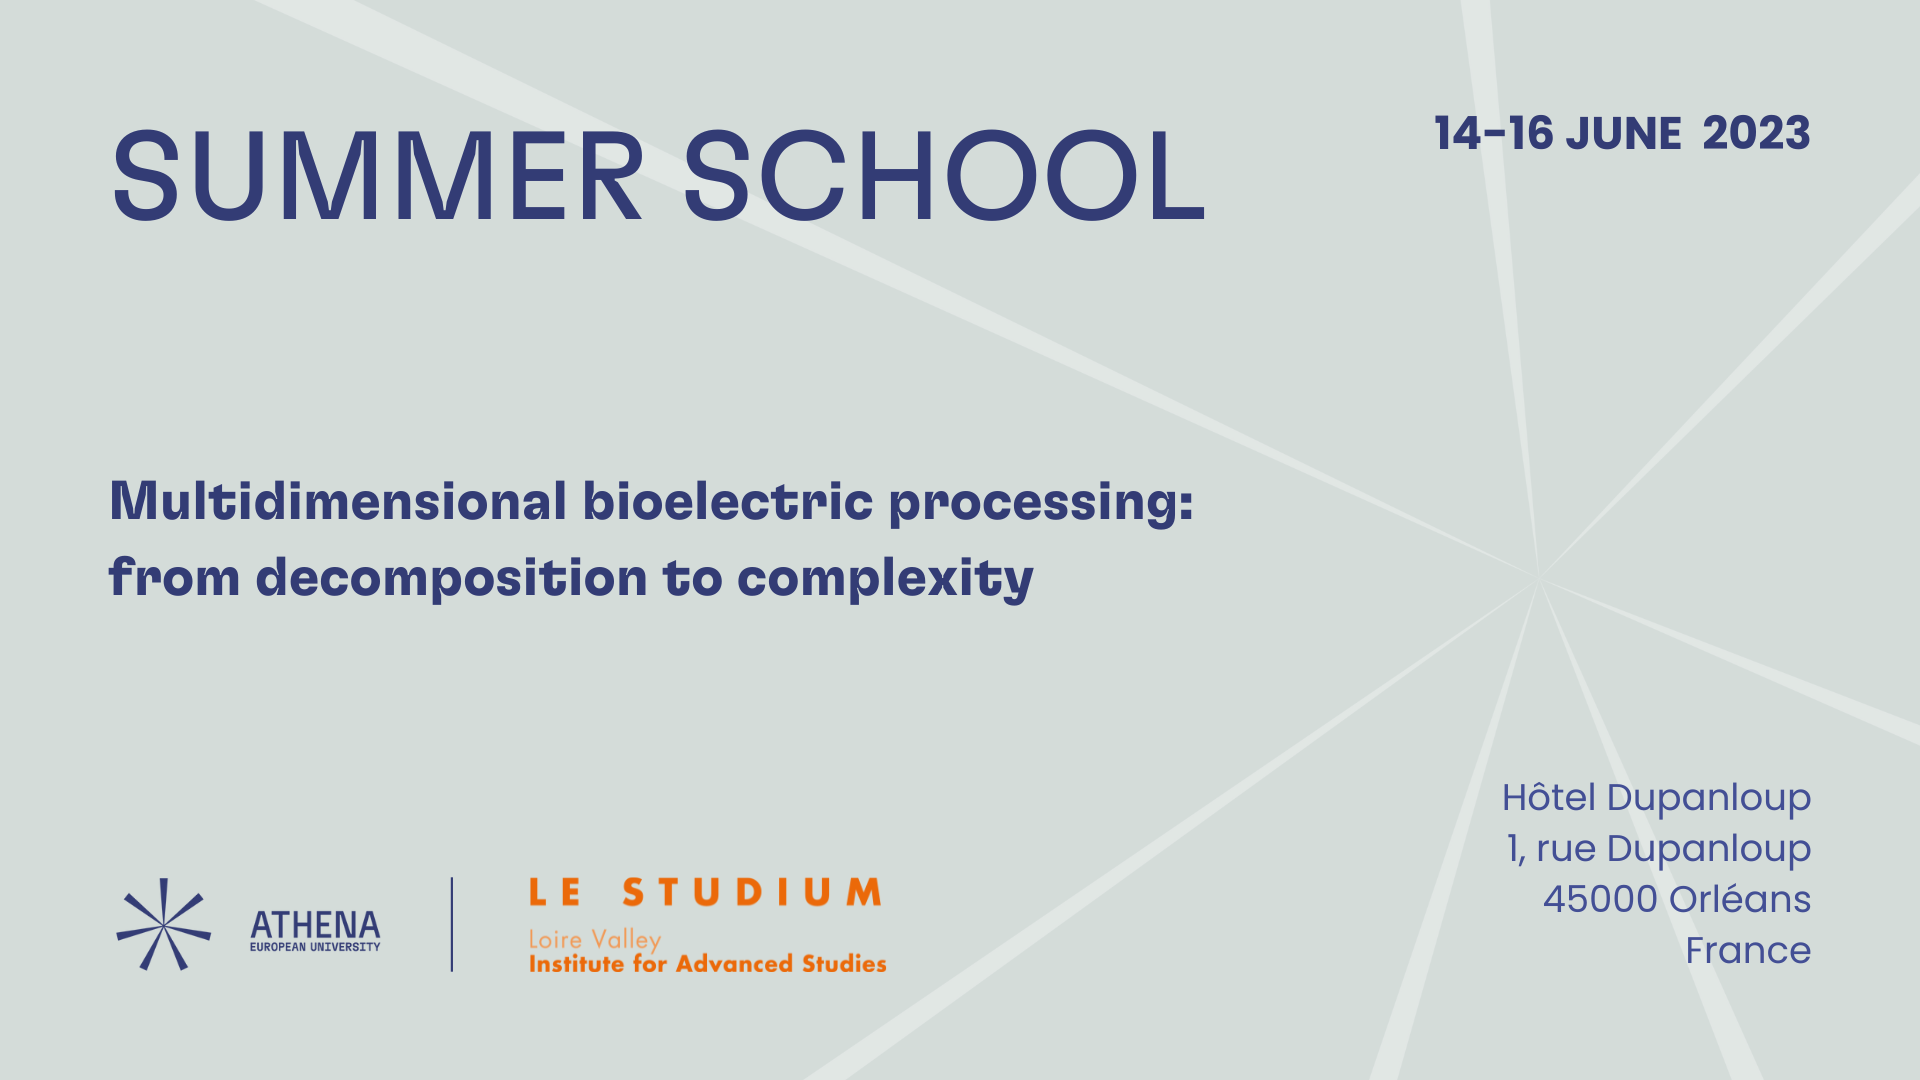 Multidimensional bioelectric processing: from decomposition to complexity